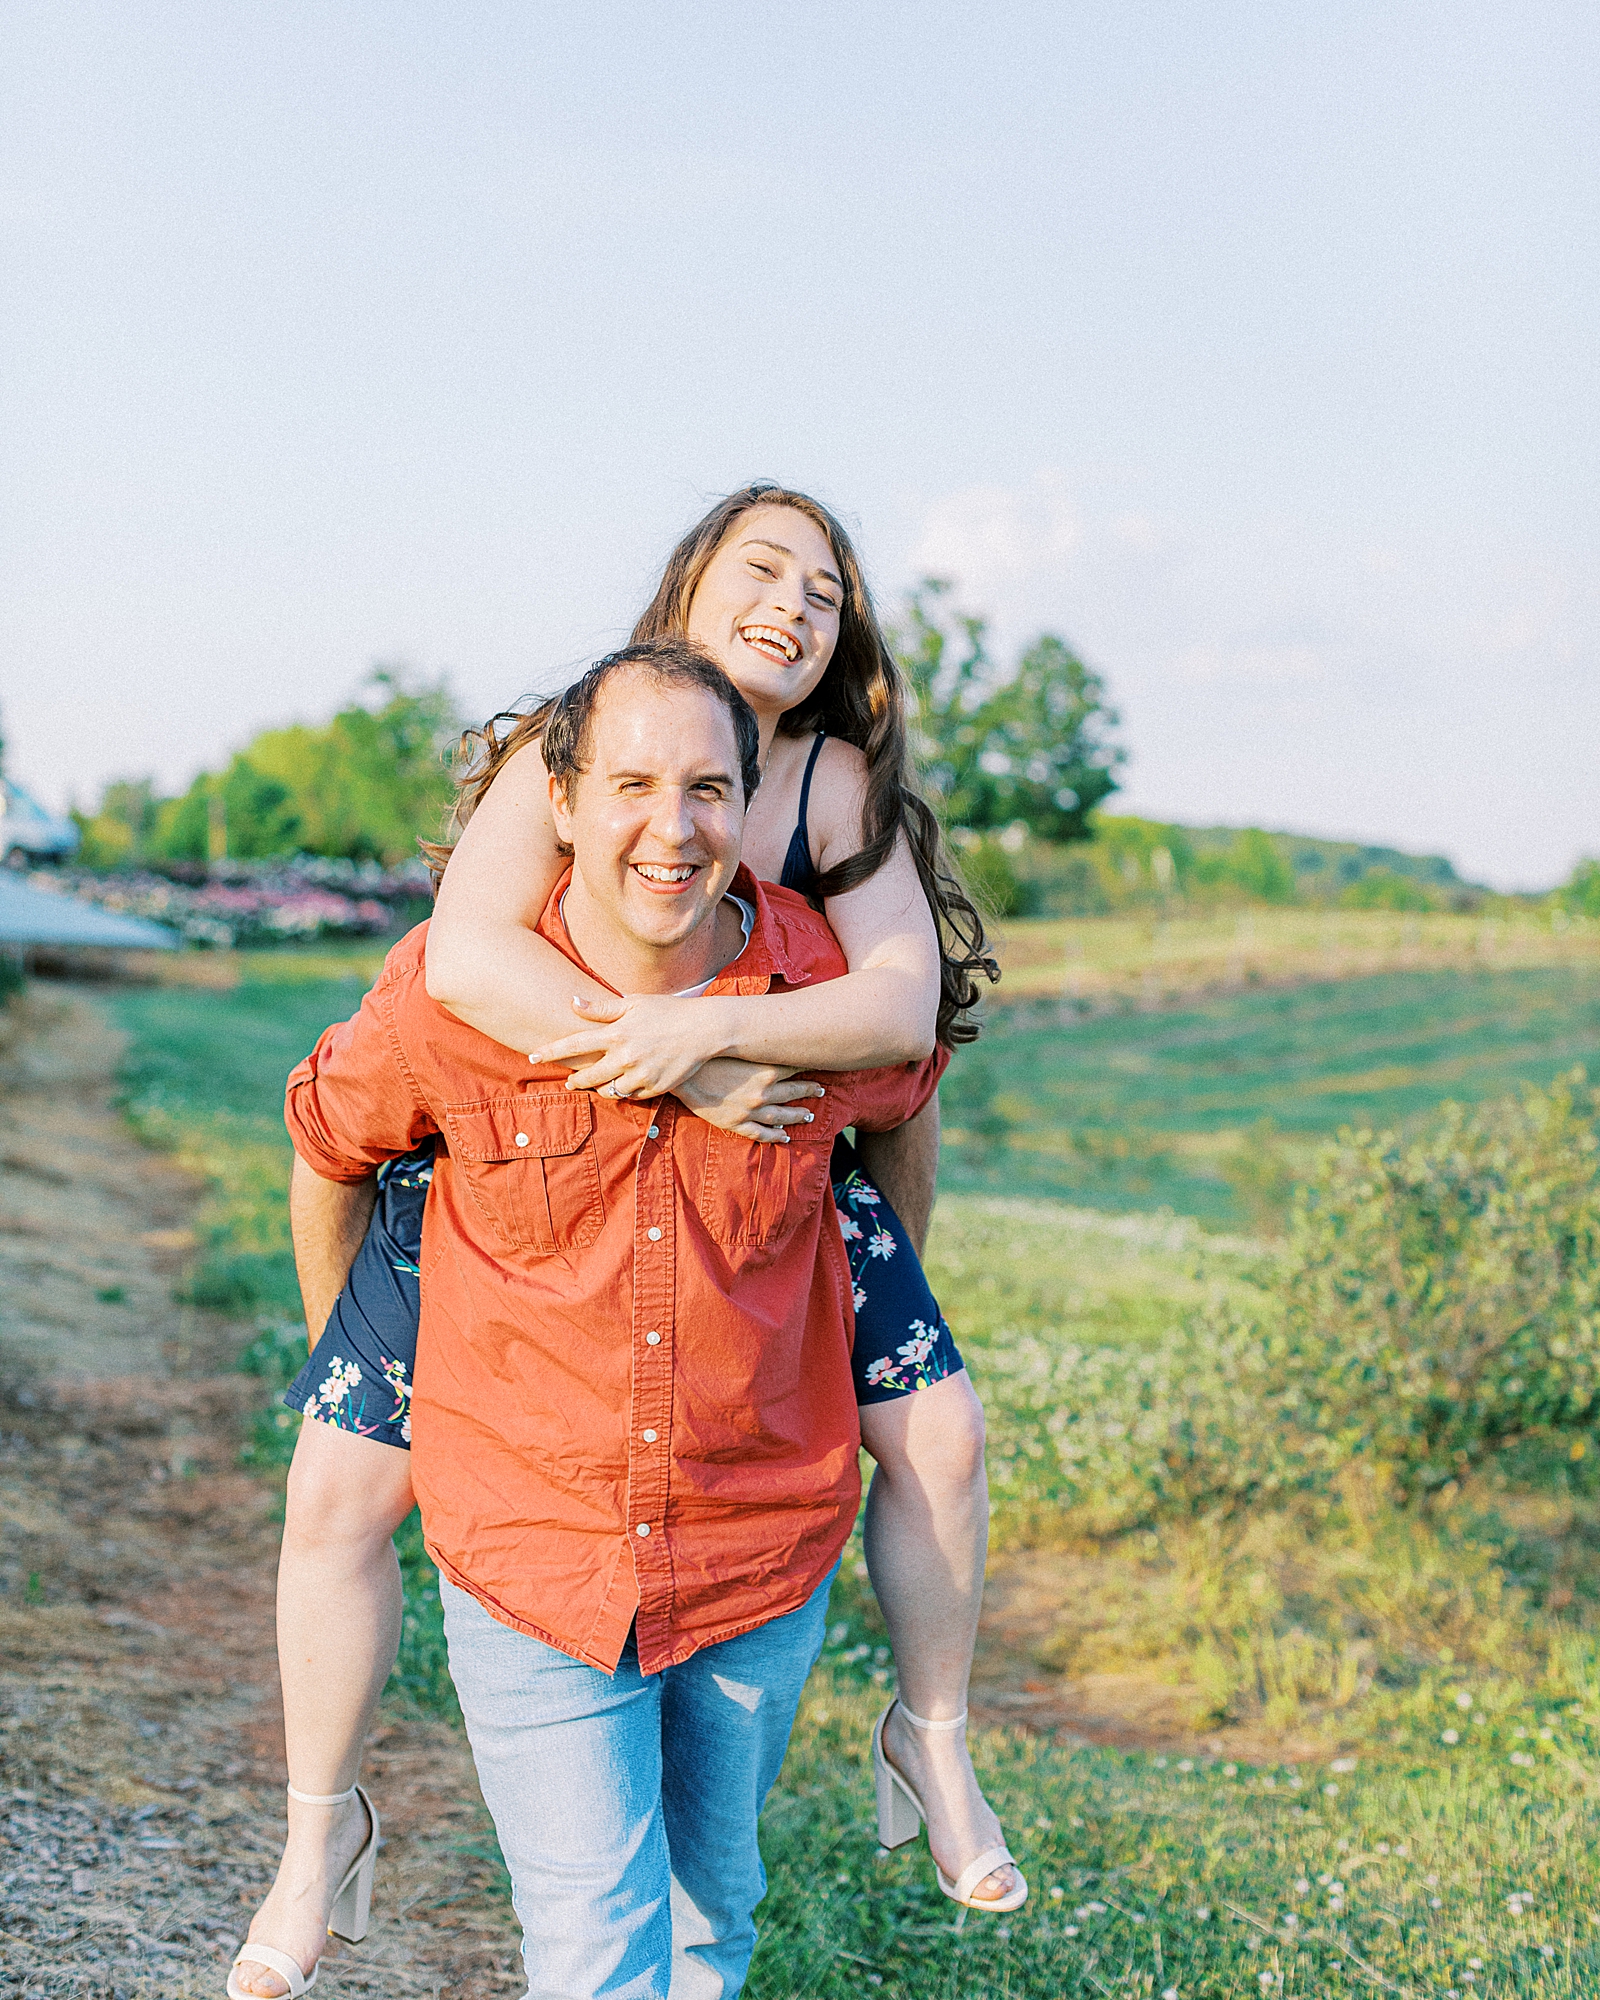 Woman laughing during piggy back ride.